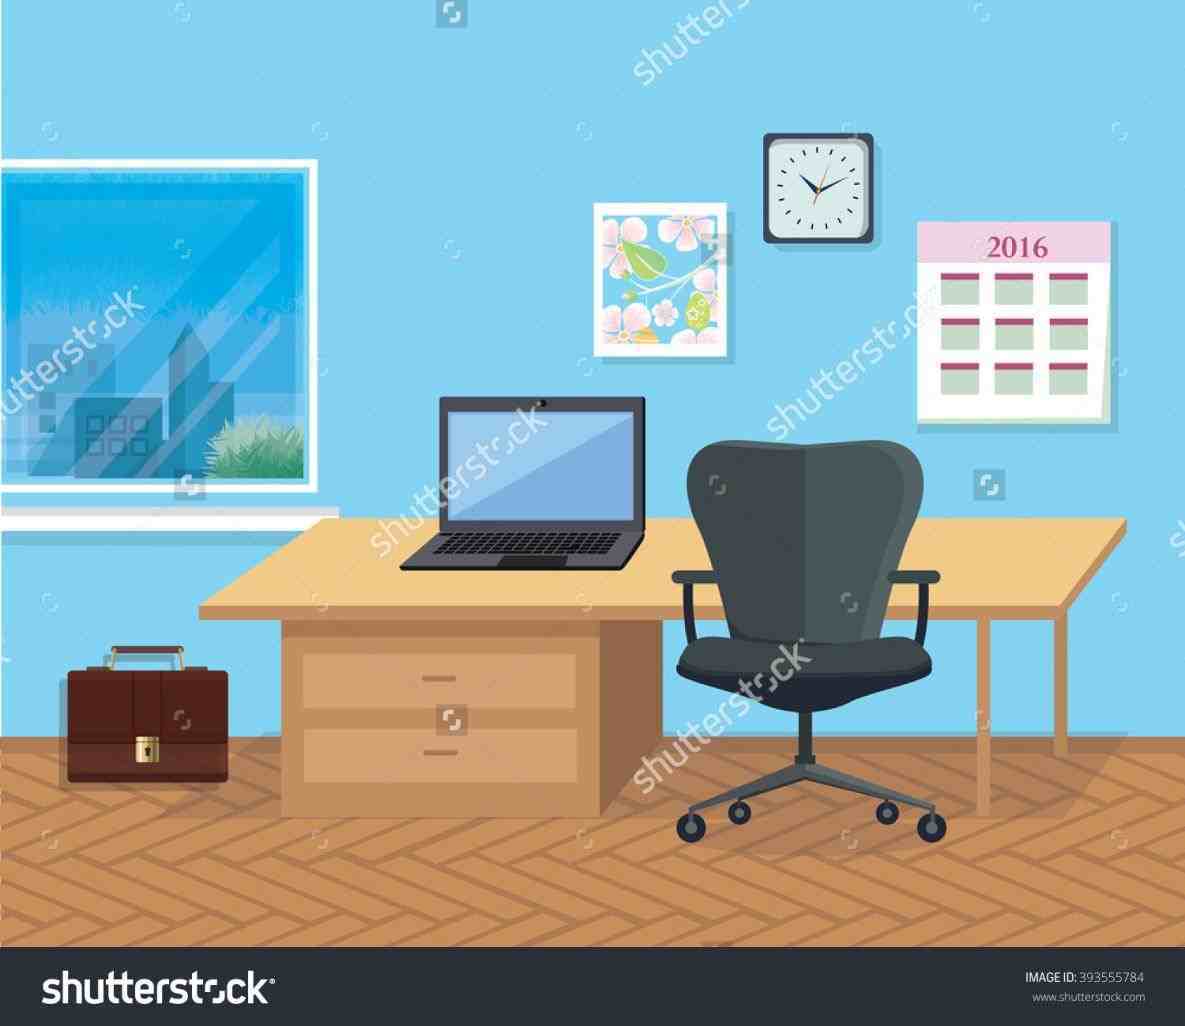 Background clipart office. Room clipground pencil officeofficeroomclipartroomclipartclipgroundbackground